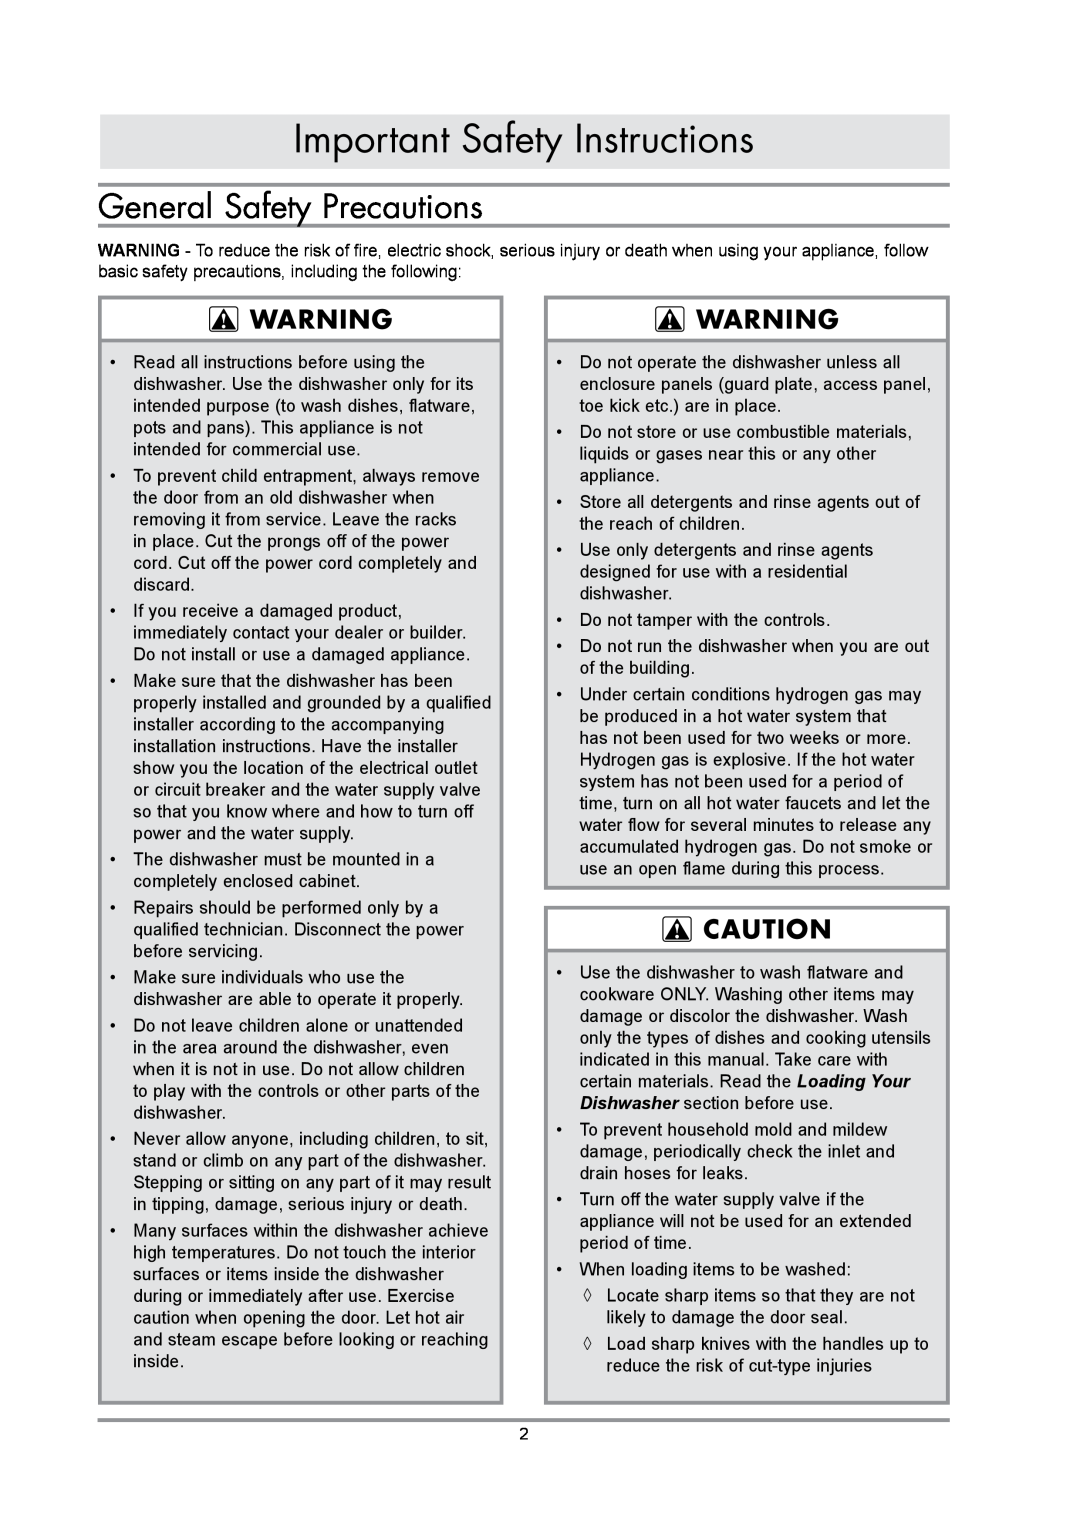 Dacor DDWF24S important safety instructions General Safety Precautions, Important Safety Instructions 